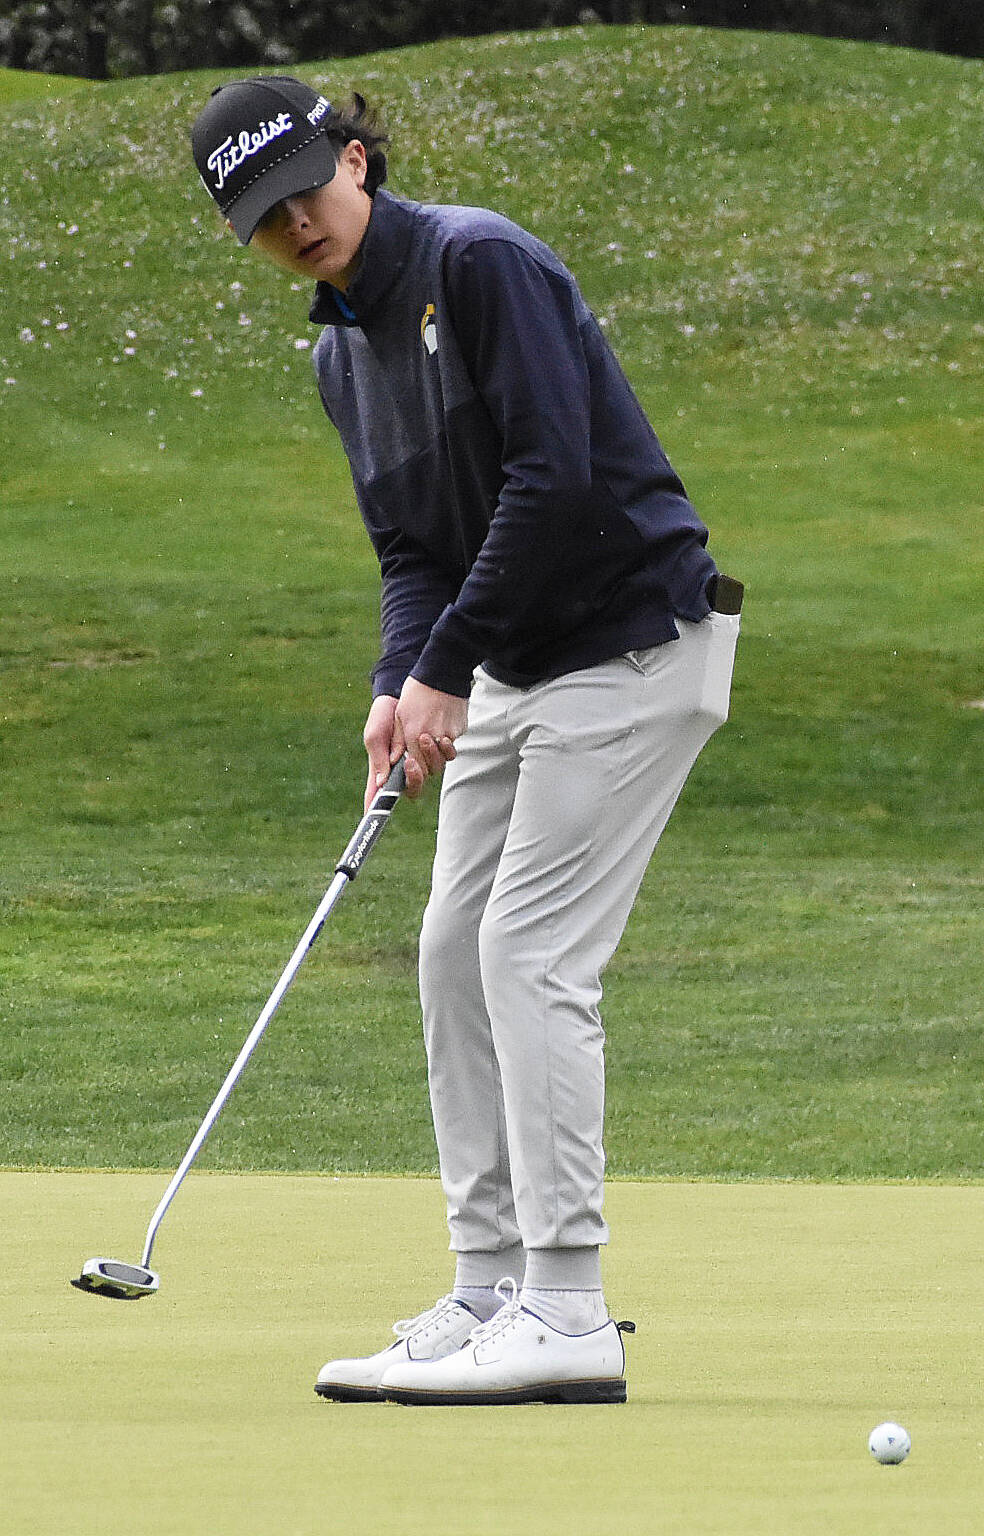 Spartan Sam Patterson putts the ball.